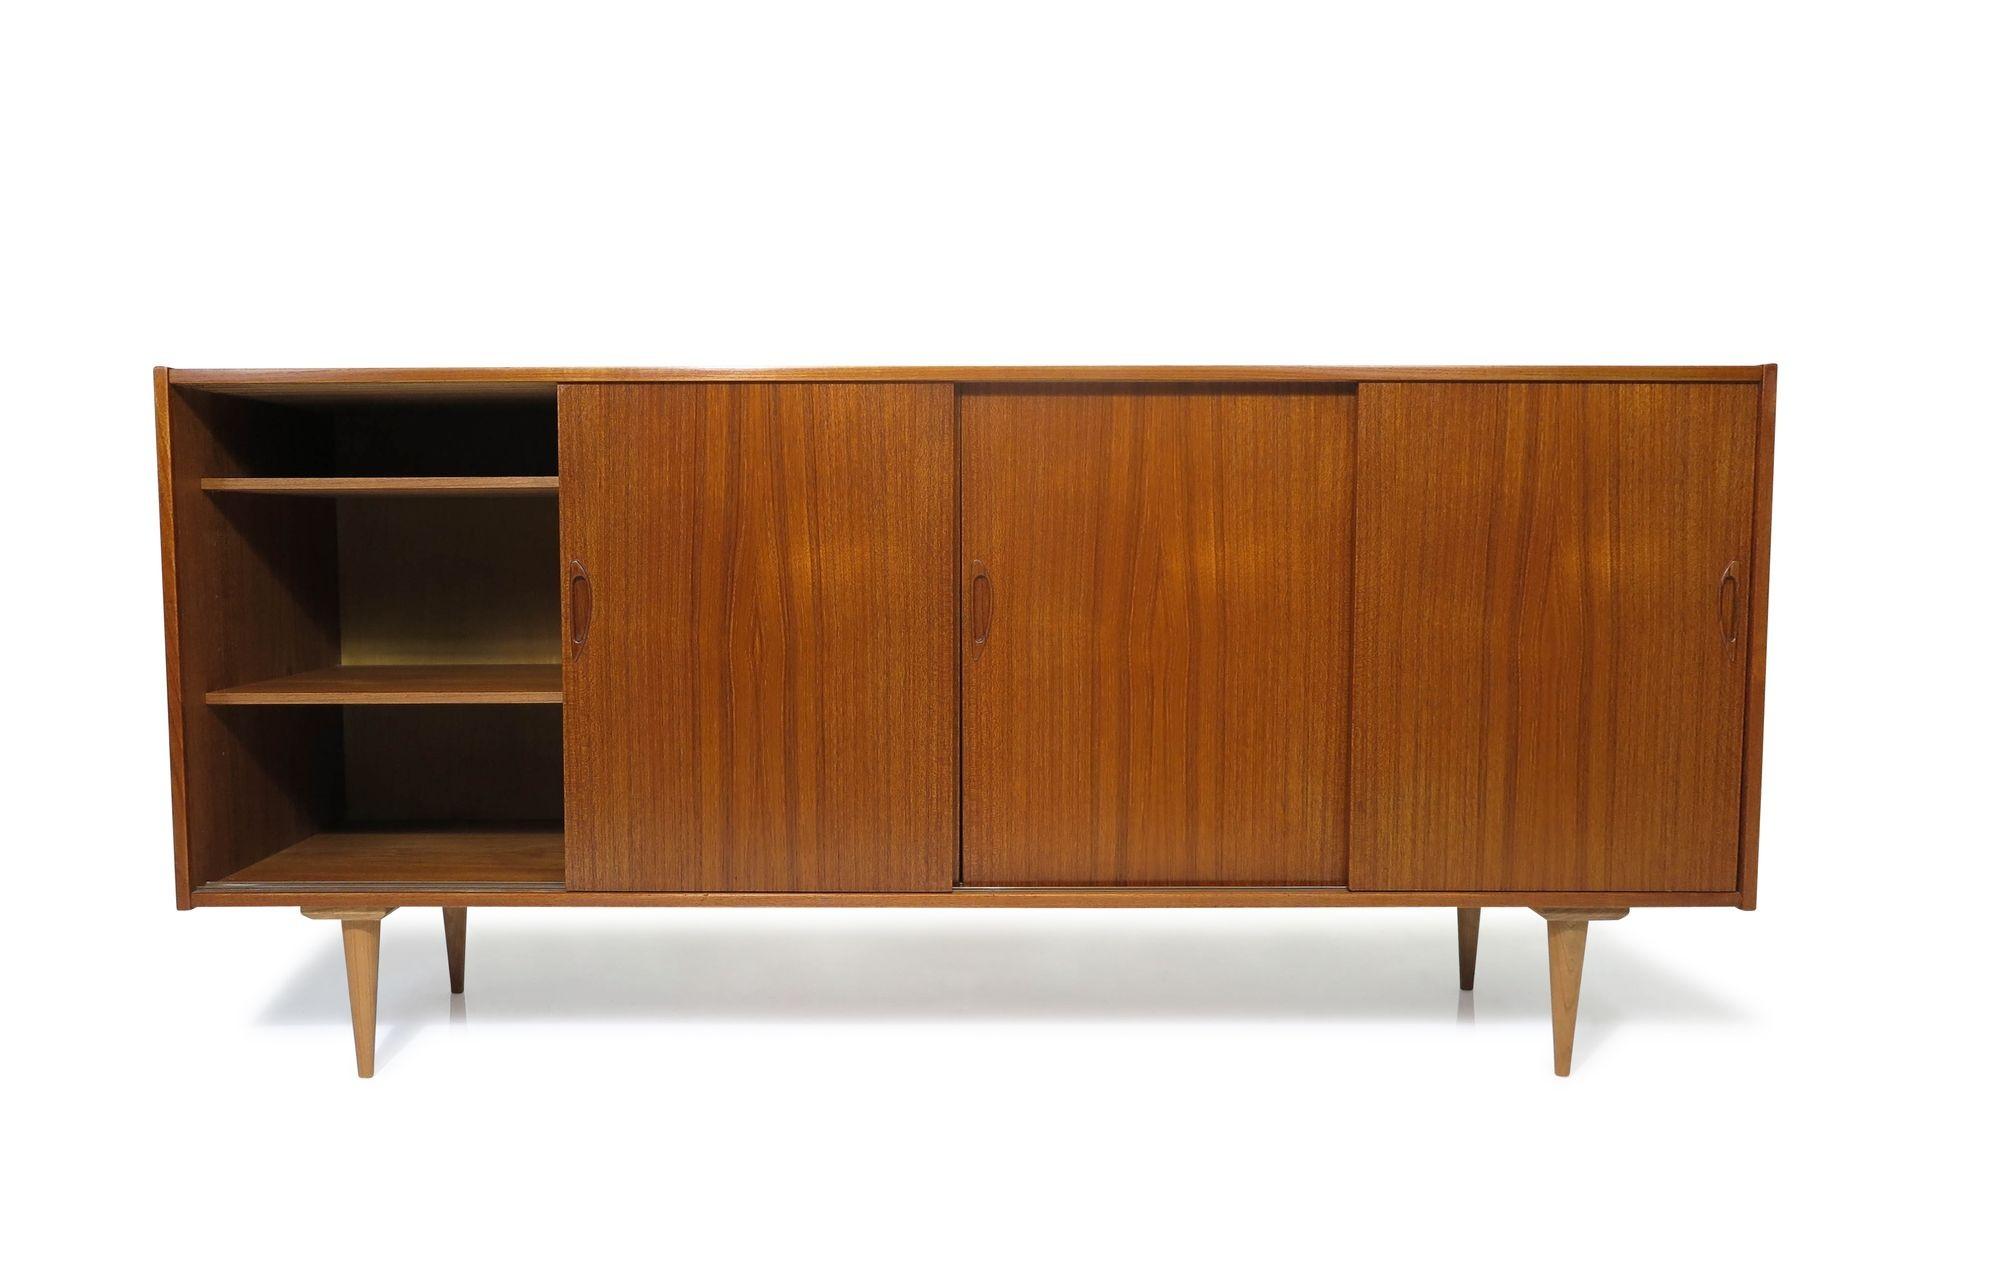 Mid-century Danish teak credenza handcrafted with four sliding cabinet doors opening to reveal an interior of teak with adjustable shelves and three silverware drawers. The cabinet has been fully restored with a hand-rubbed natural oil finish. It is